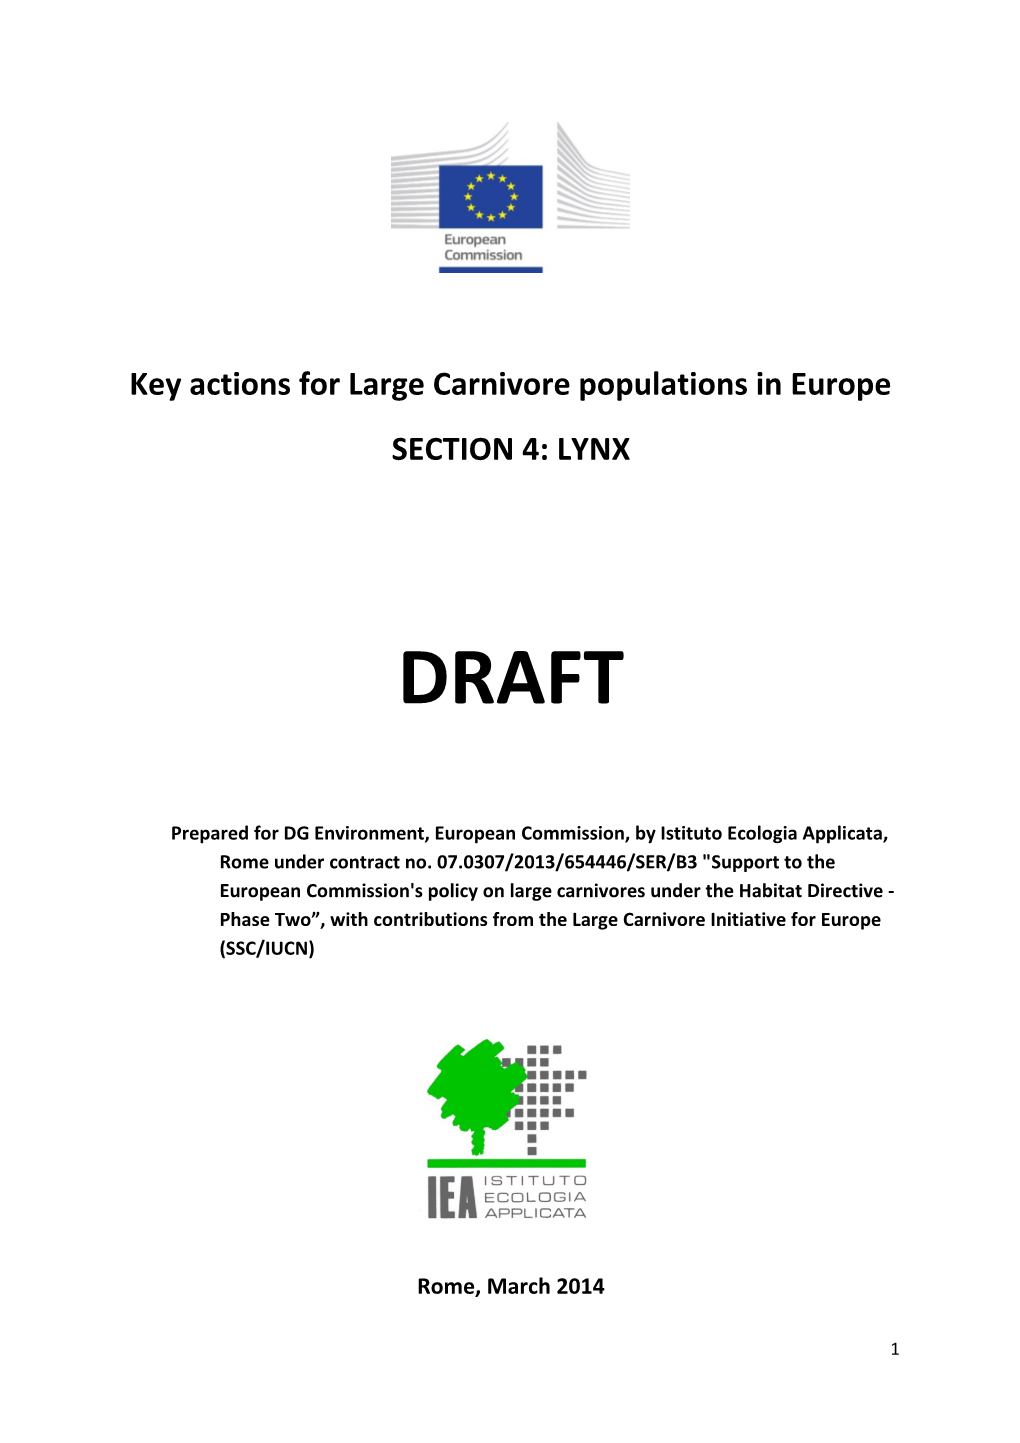 Key Actions for Large Carnivore Populations in Europe